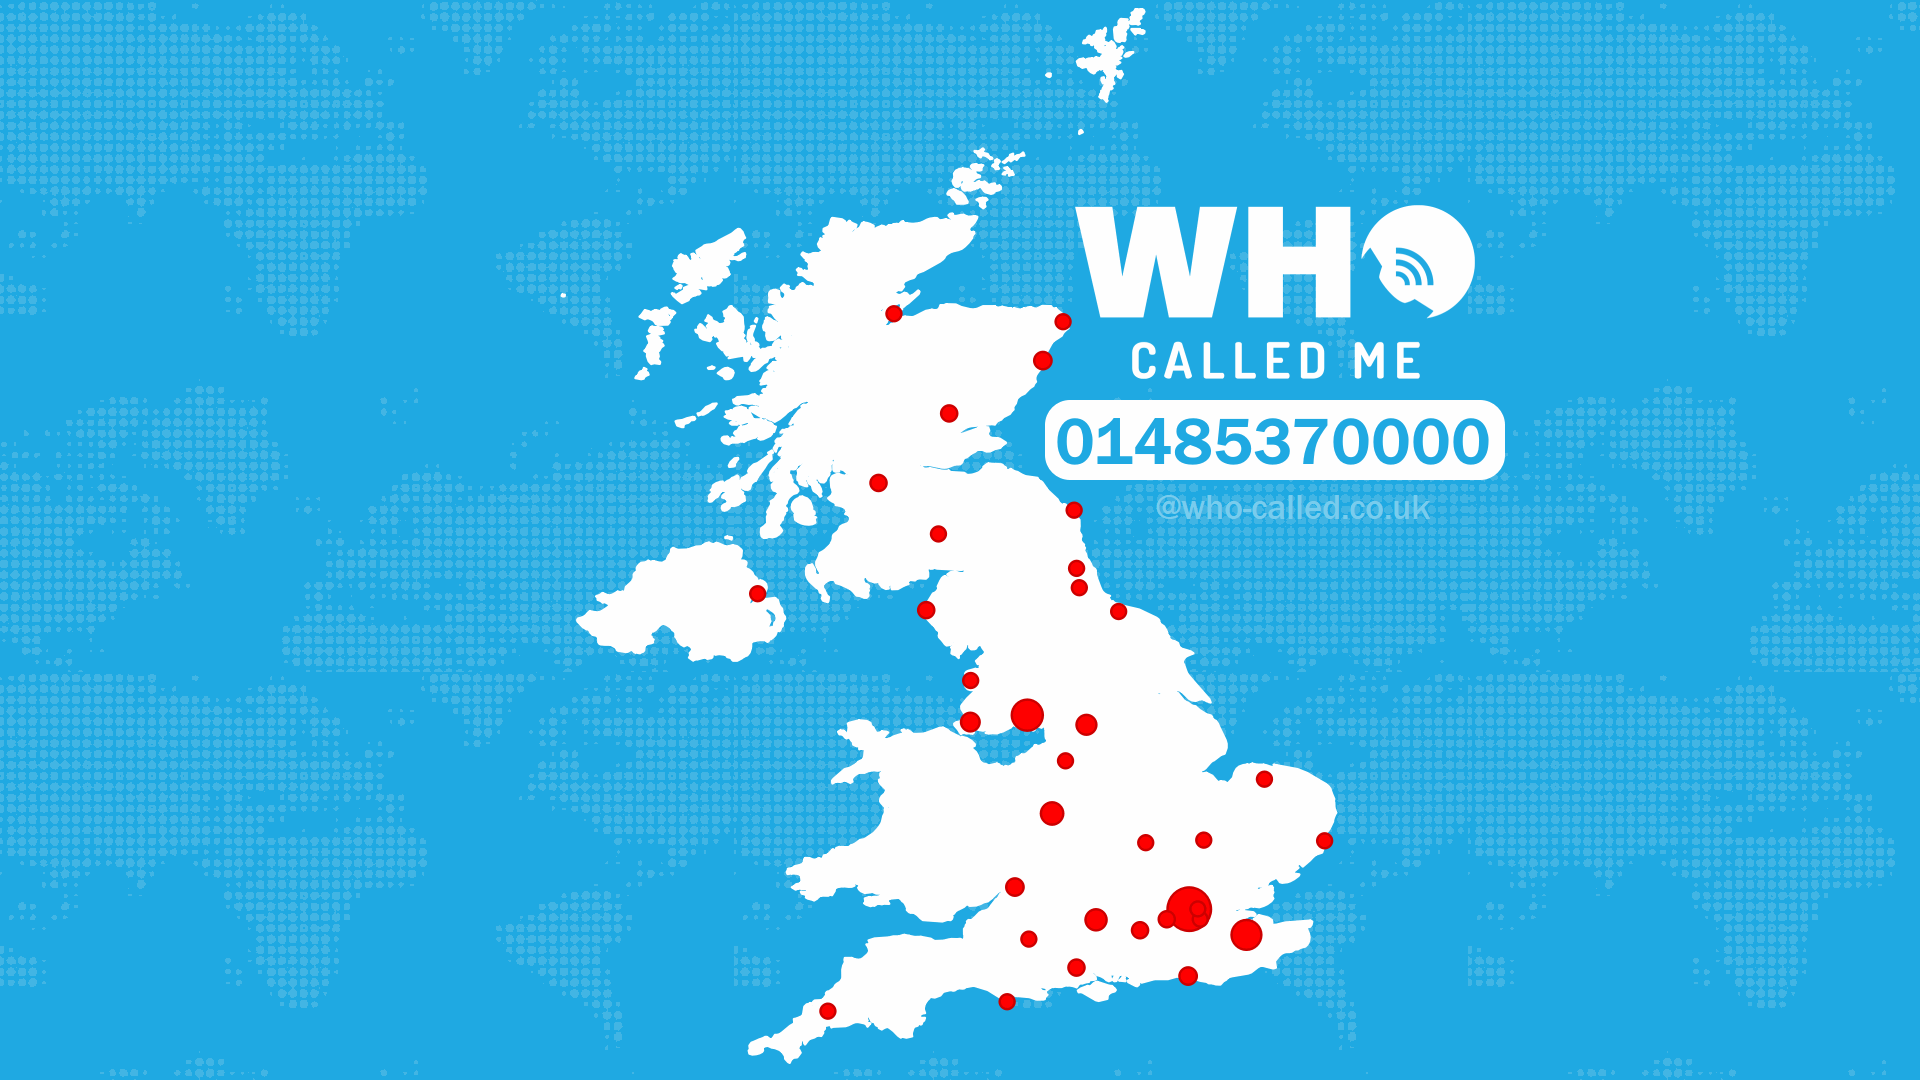 01485370000 Who Called Me? | who-called.co.uk